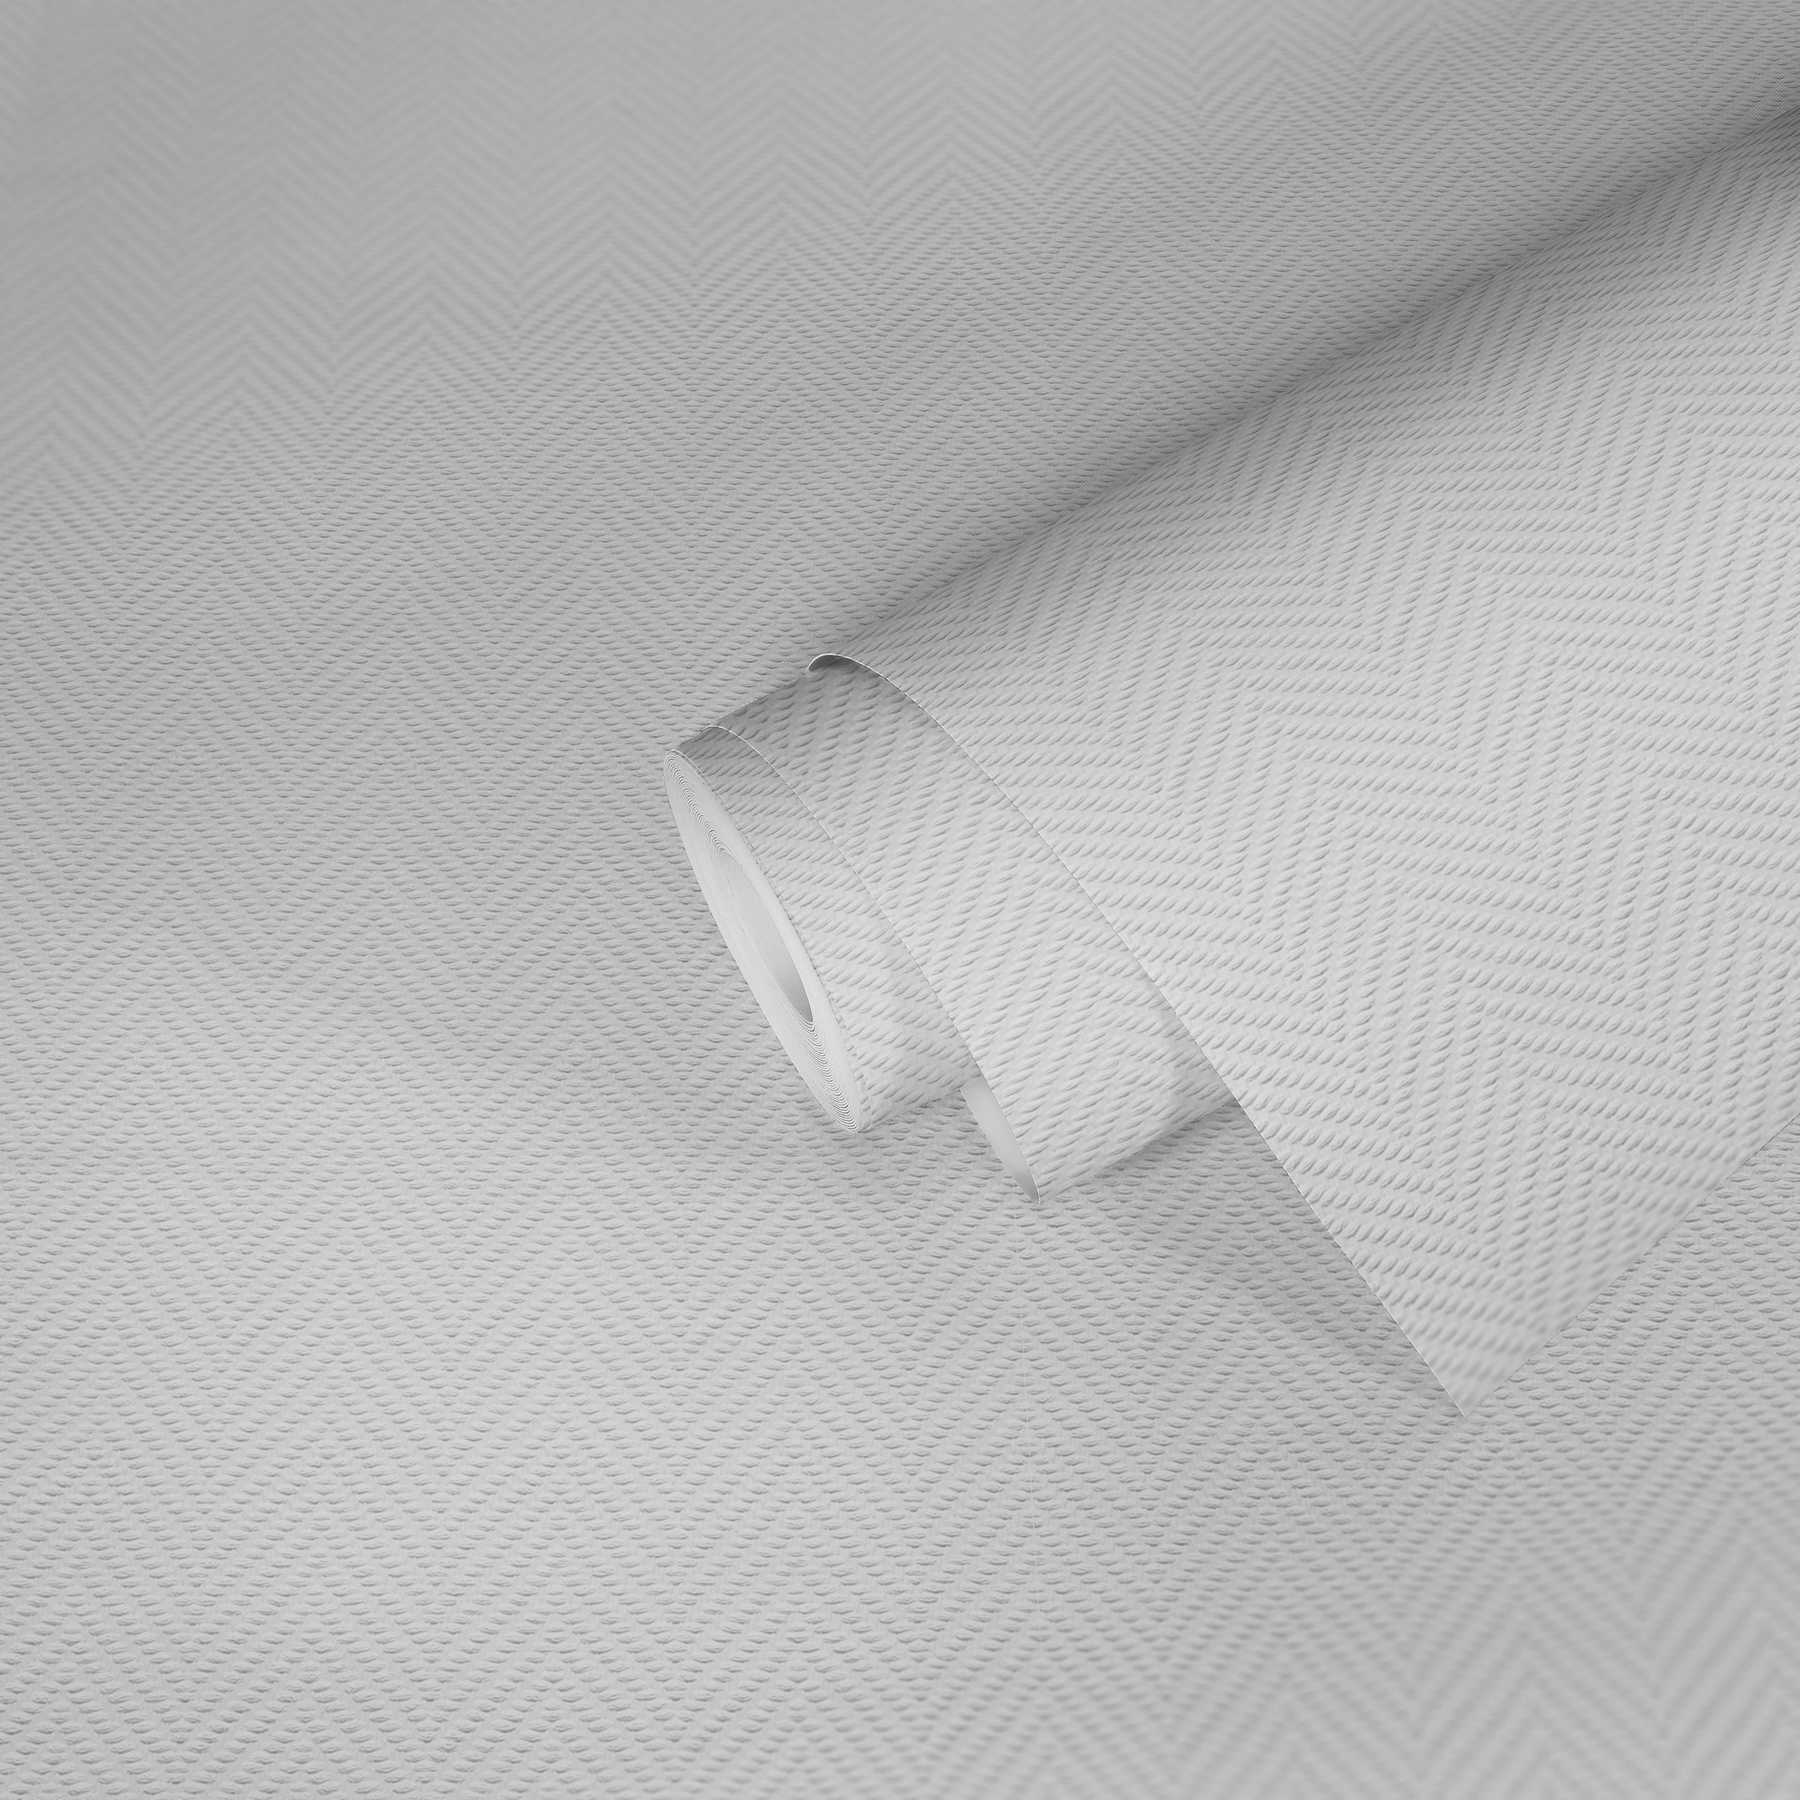             Paper wallpaper white with herringbone structure pattern
        